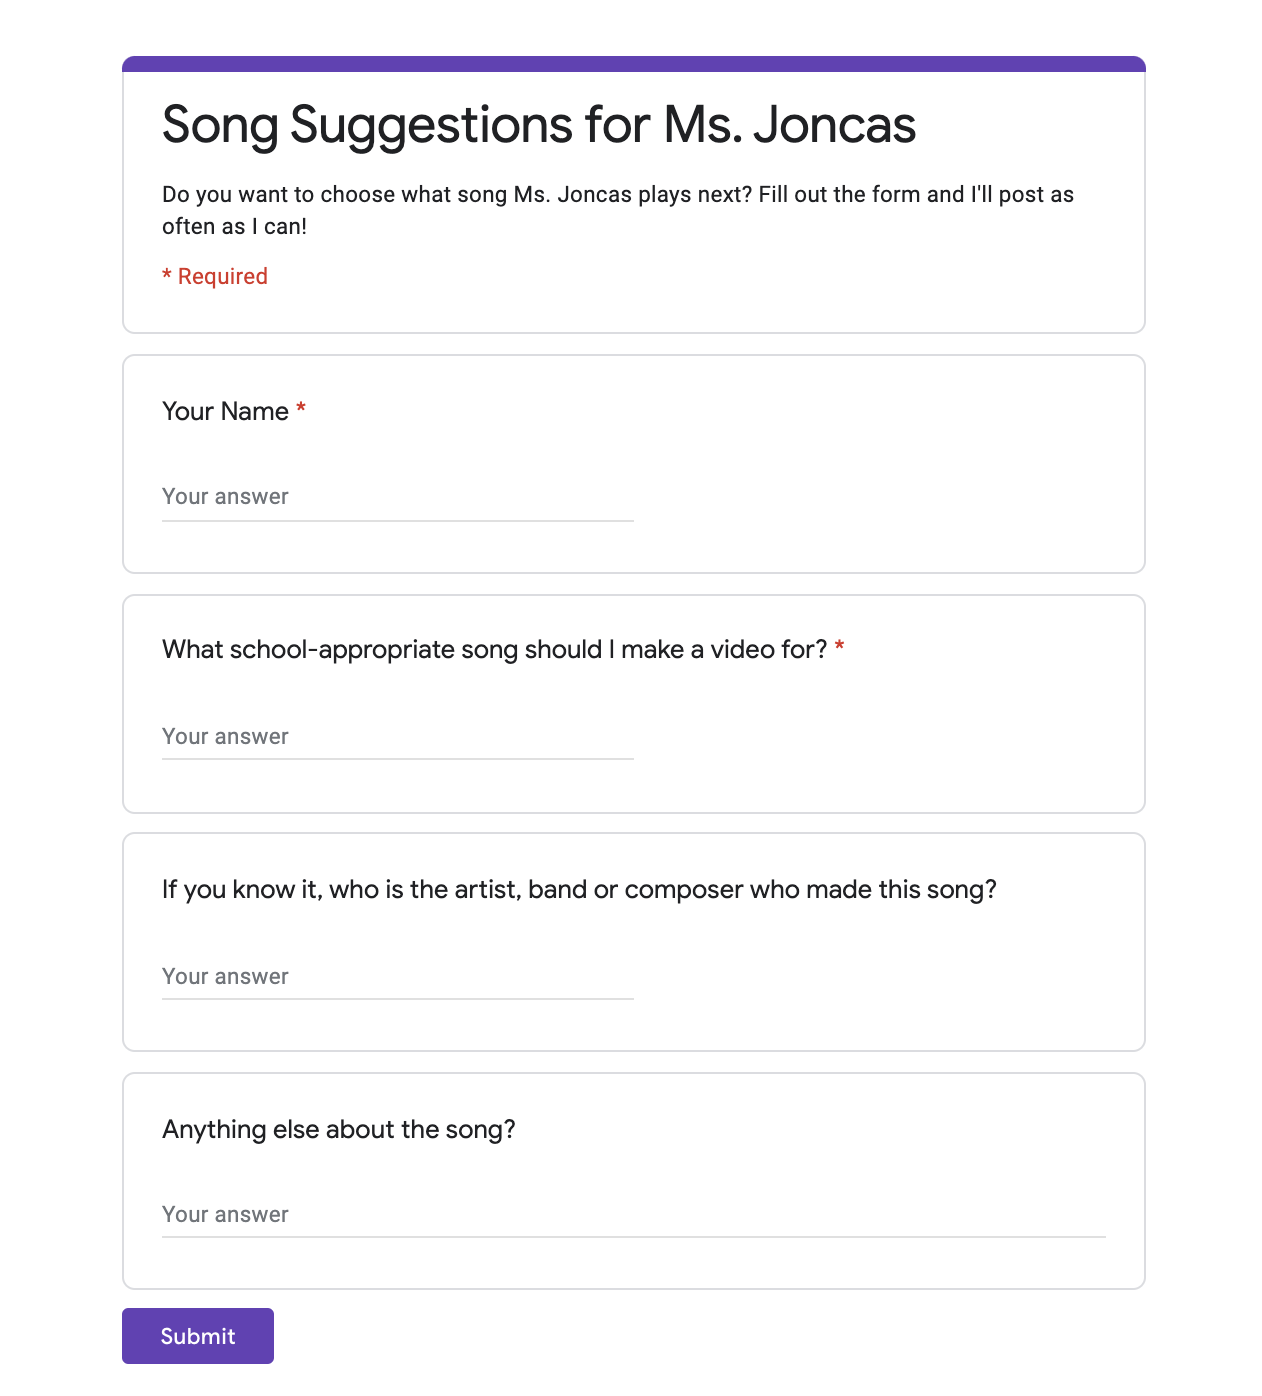 Song Suggestions for Ms. Joncas - Google Form